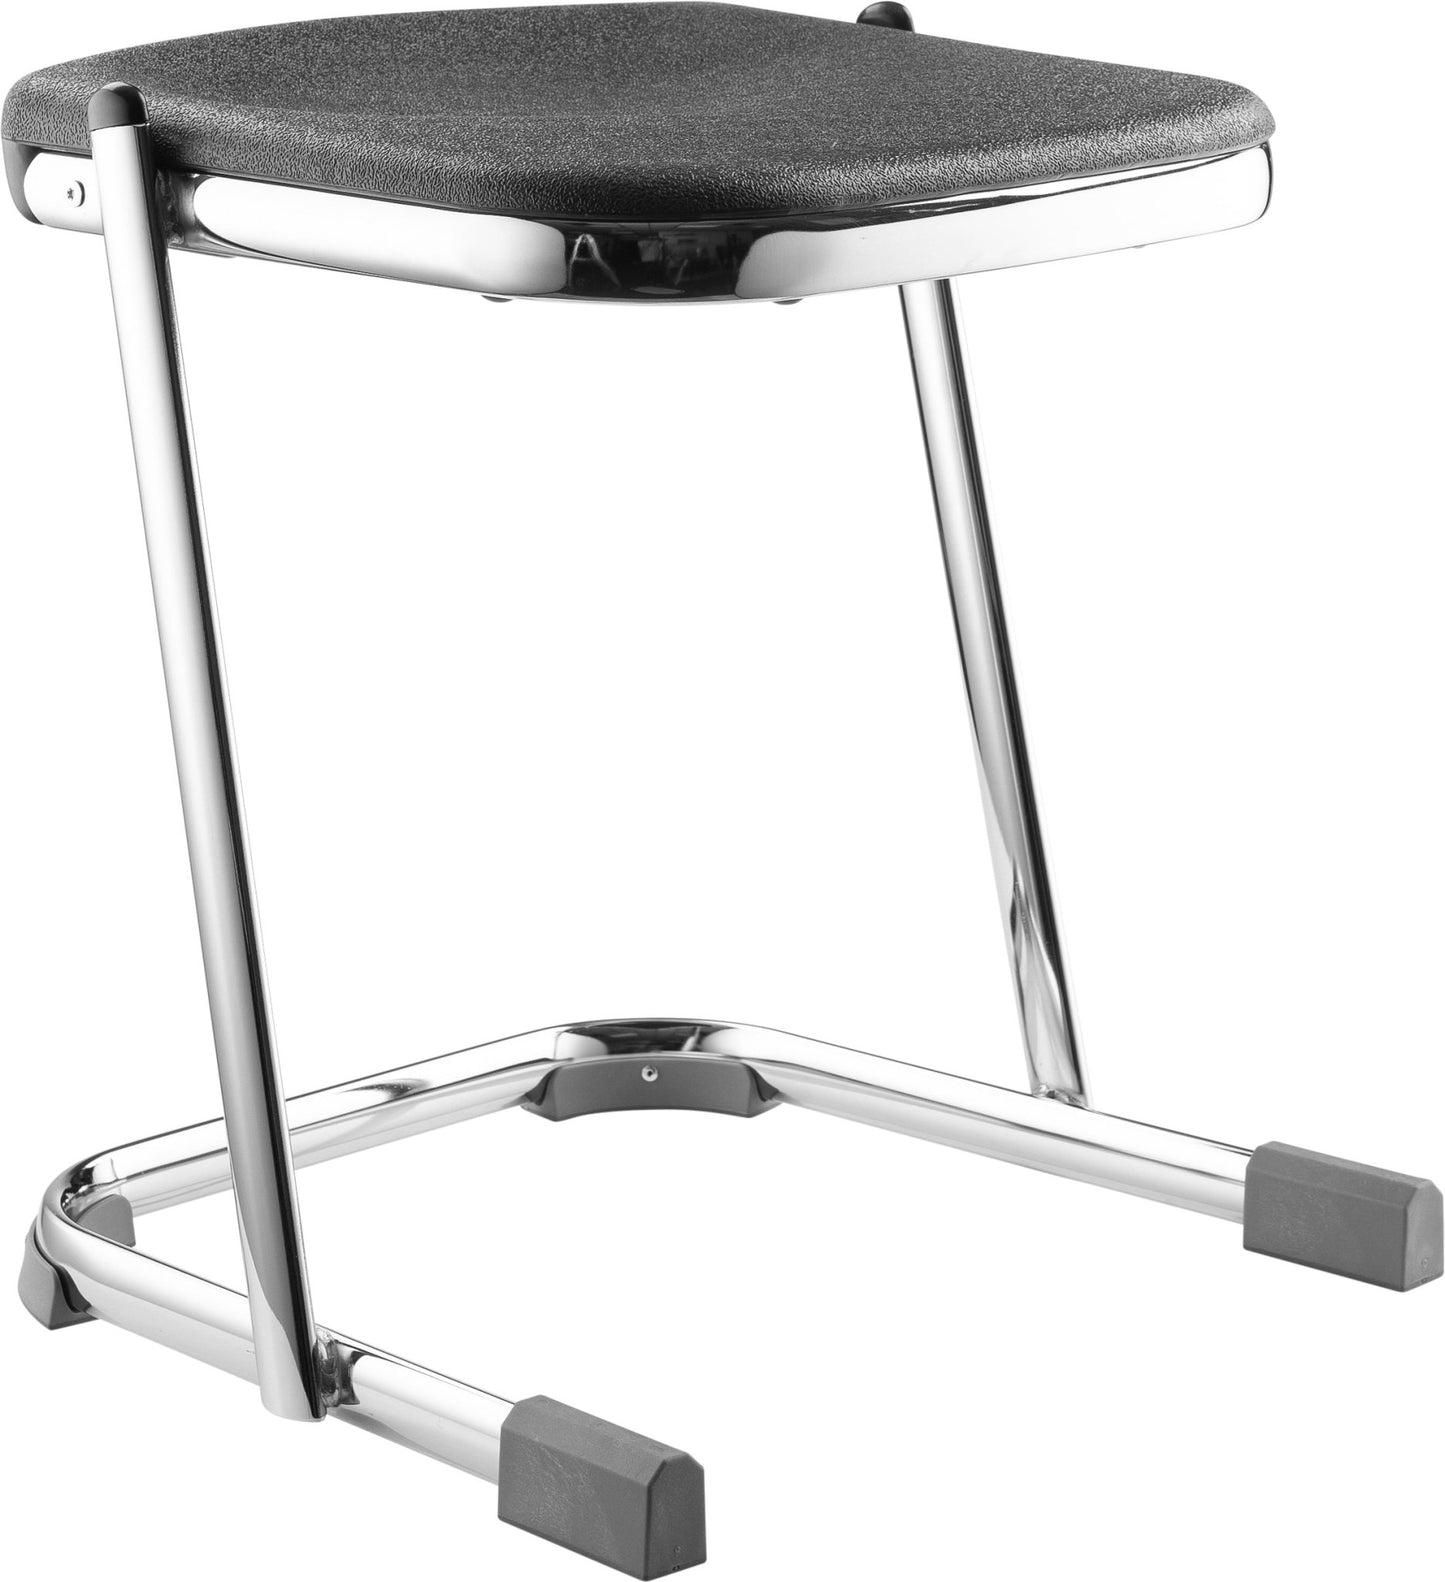 NPS Elephant Z-stool 18" H Stool with Blow Molded Seat (National Public Seating NPS-6618) - SchoolOutlet